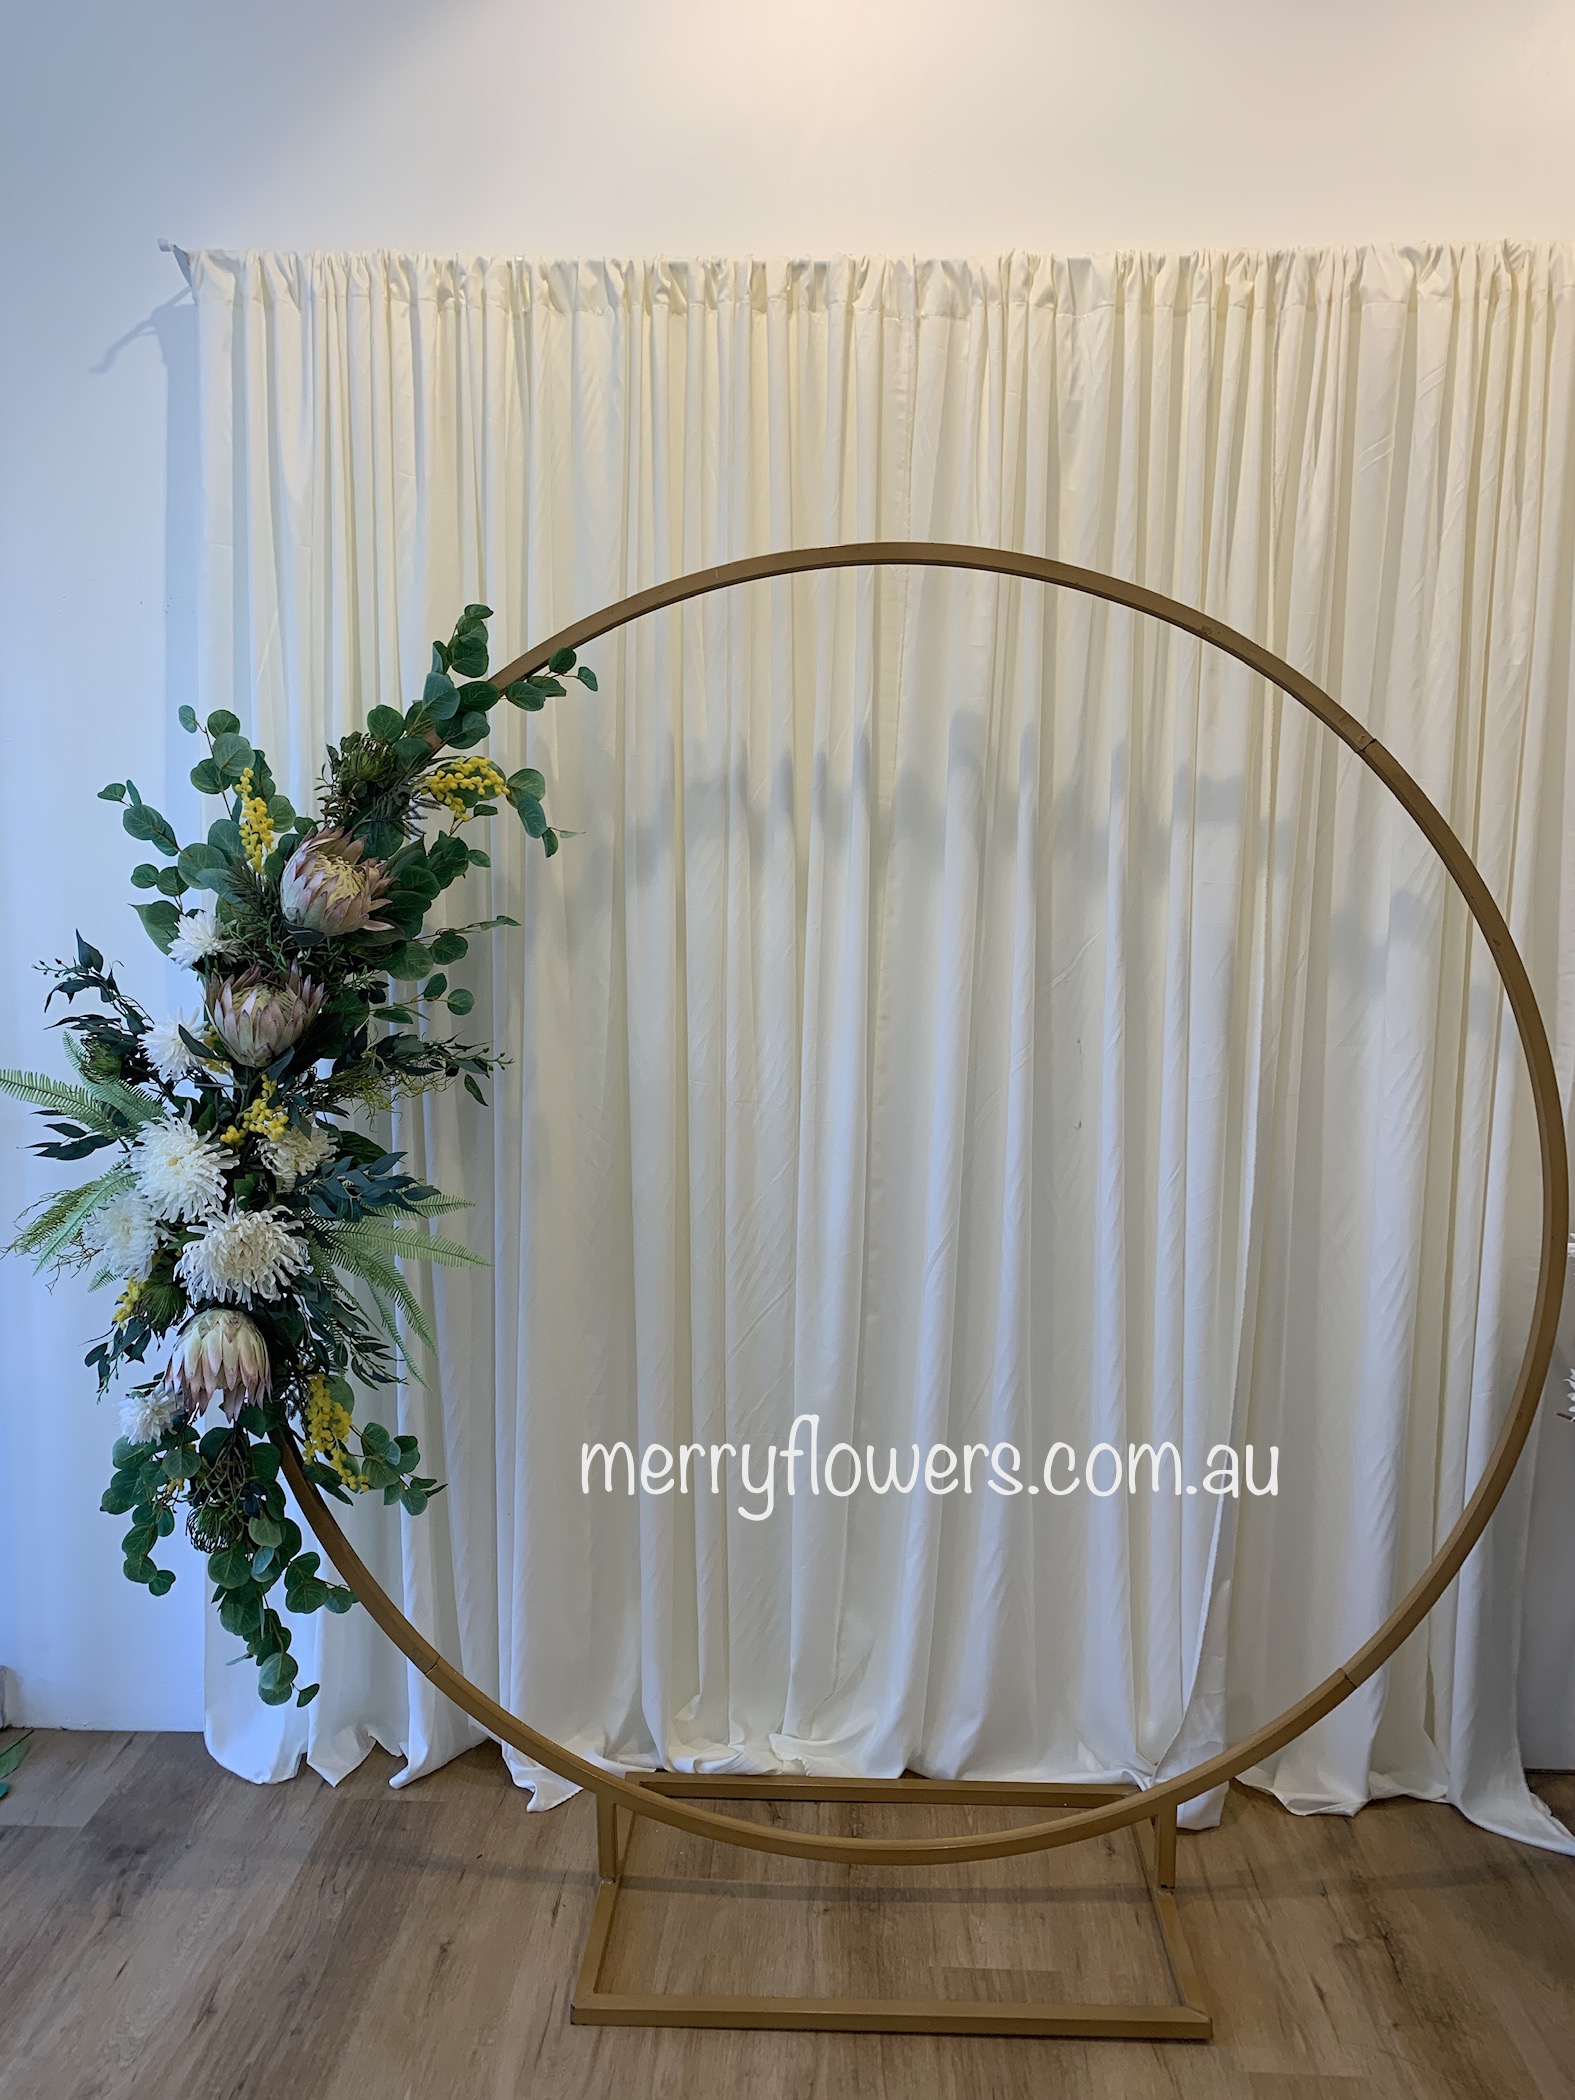 A007-Gold Circle Arch with Native Flowers